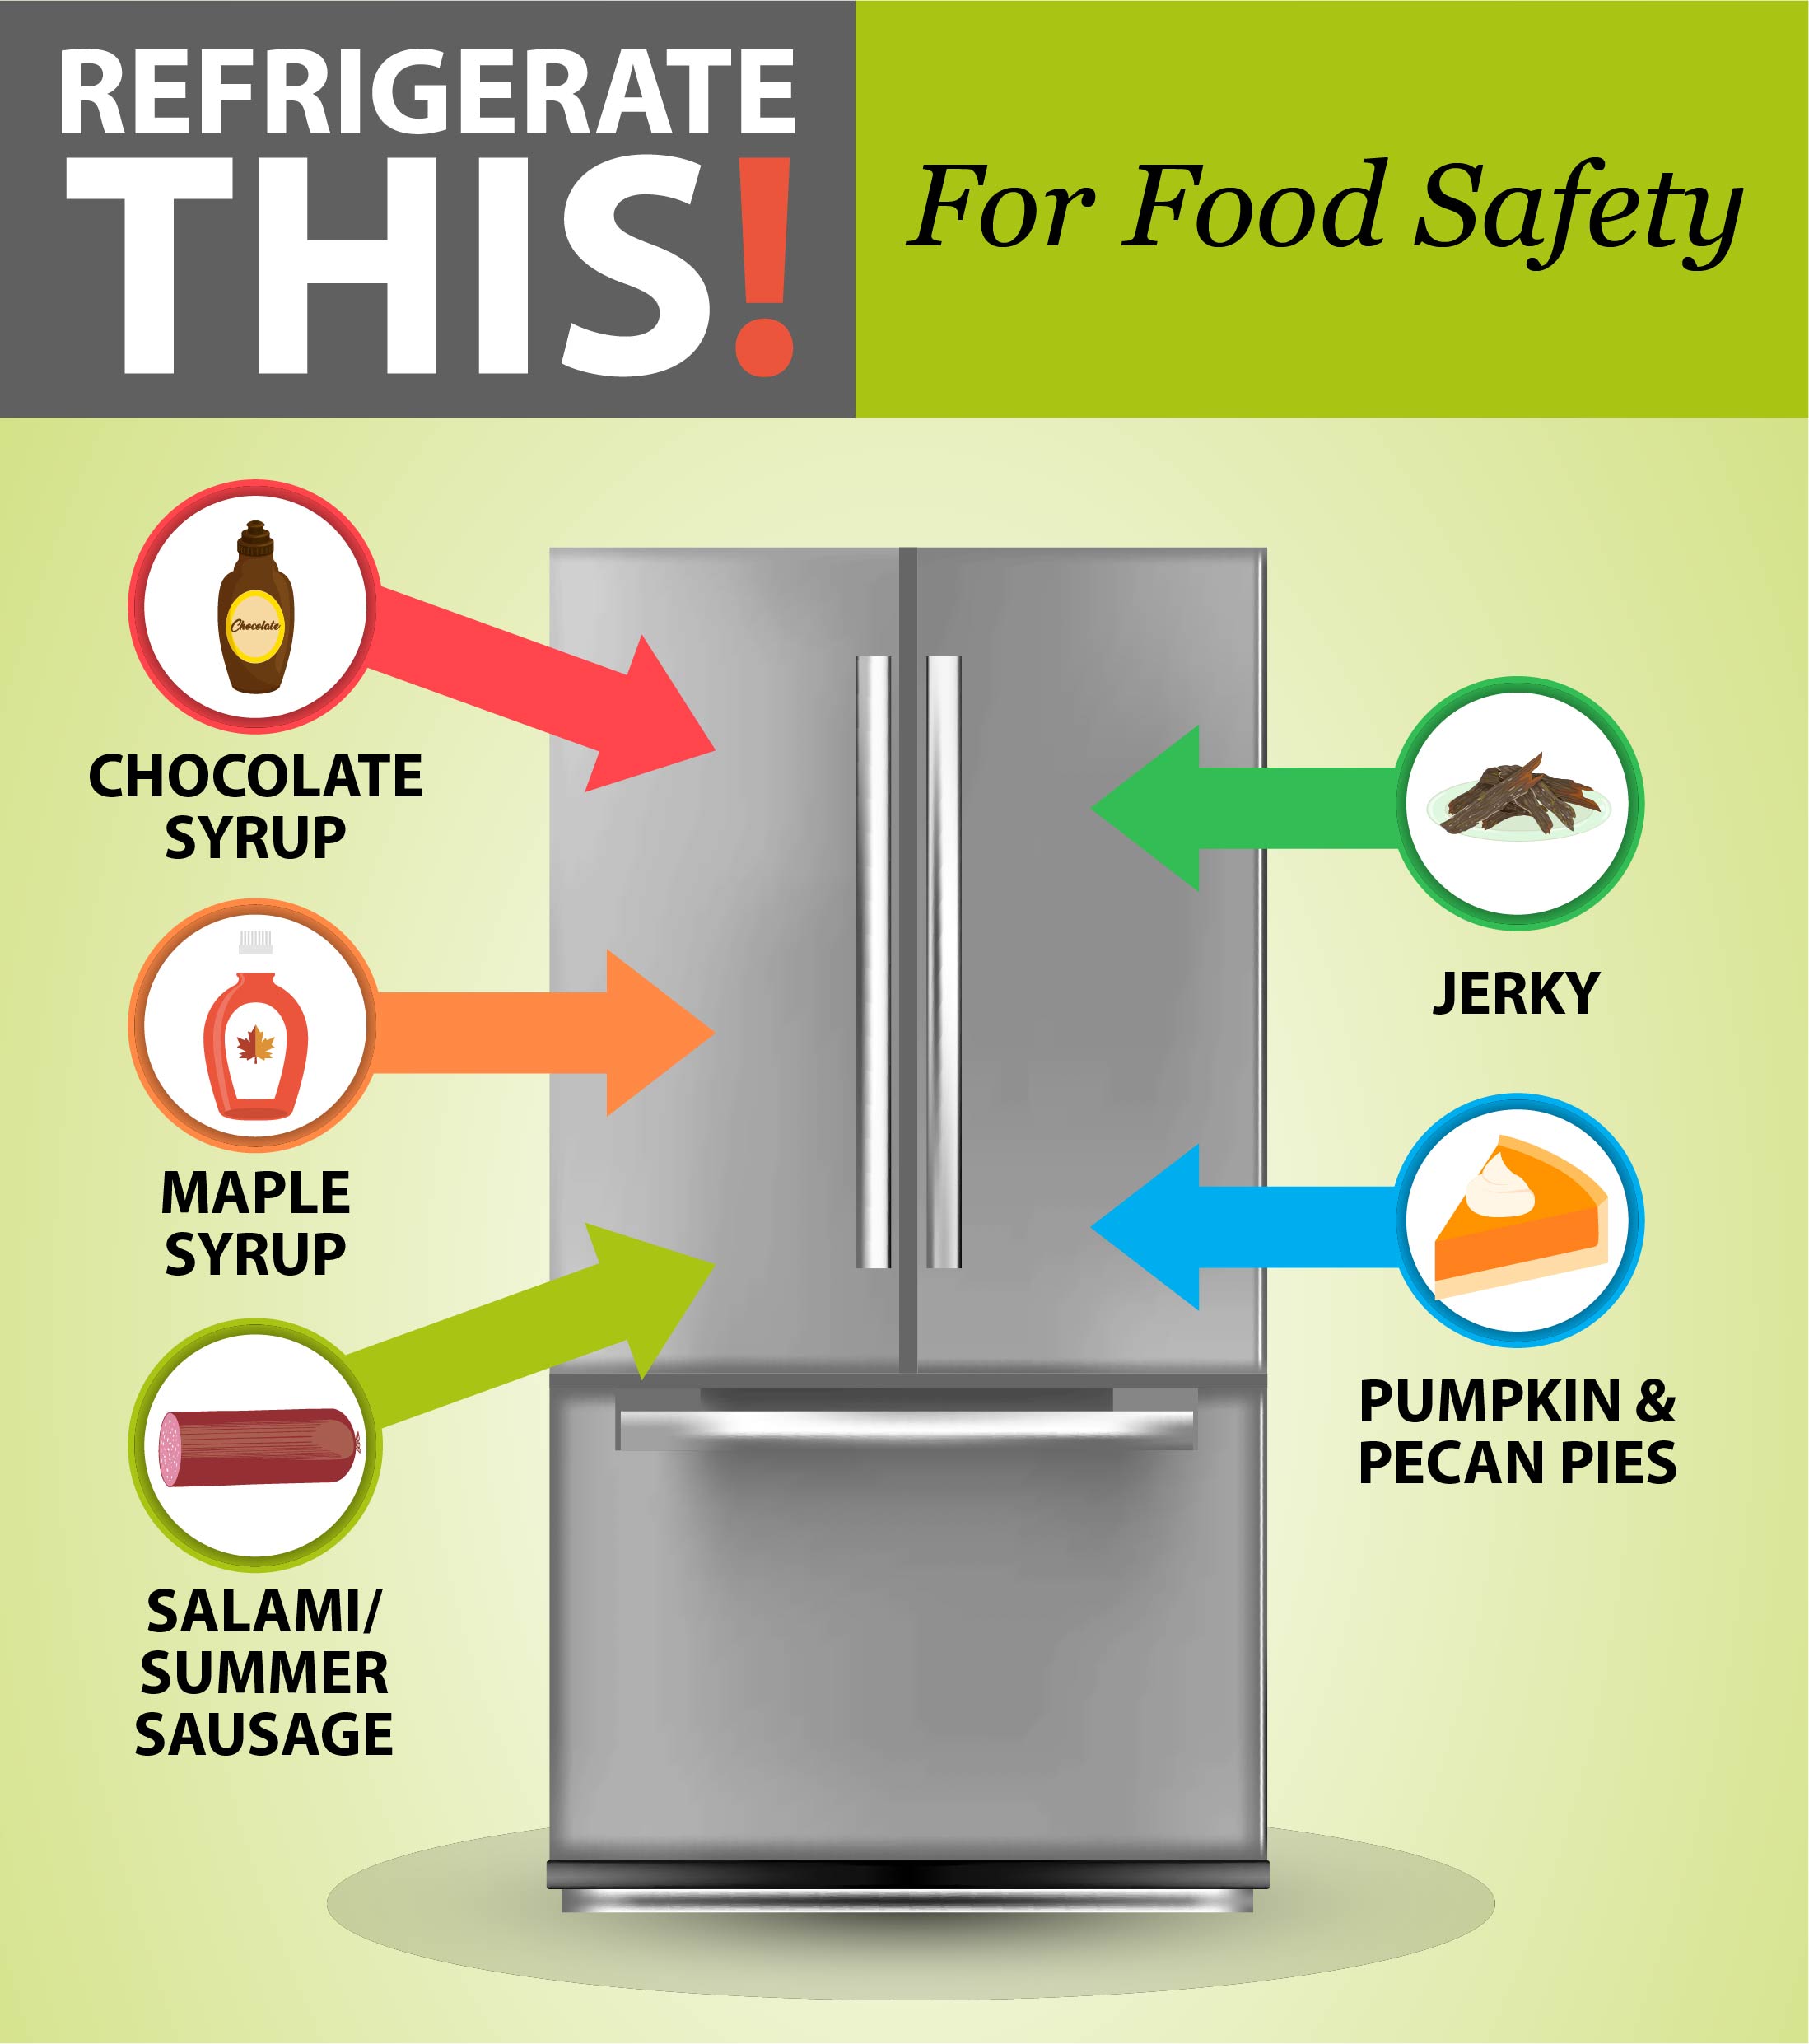 Refrigerate this! For food safety: maple syrup, chocolate syrup, salami, jerky, and pumpkin and pecan pies.